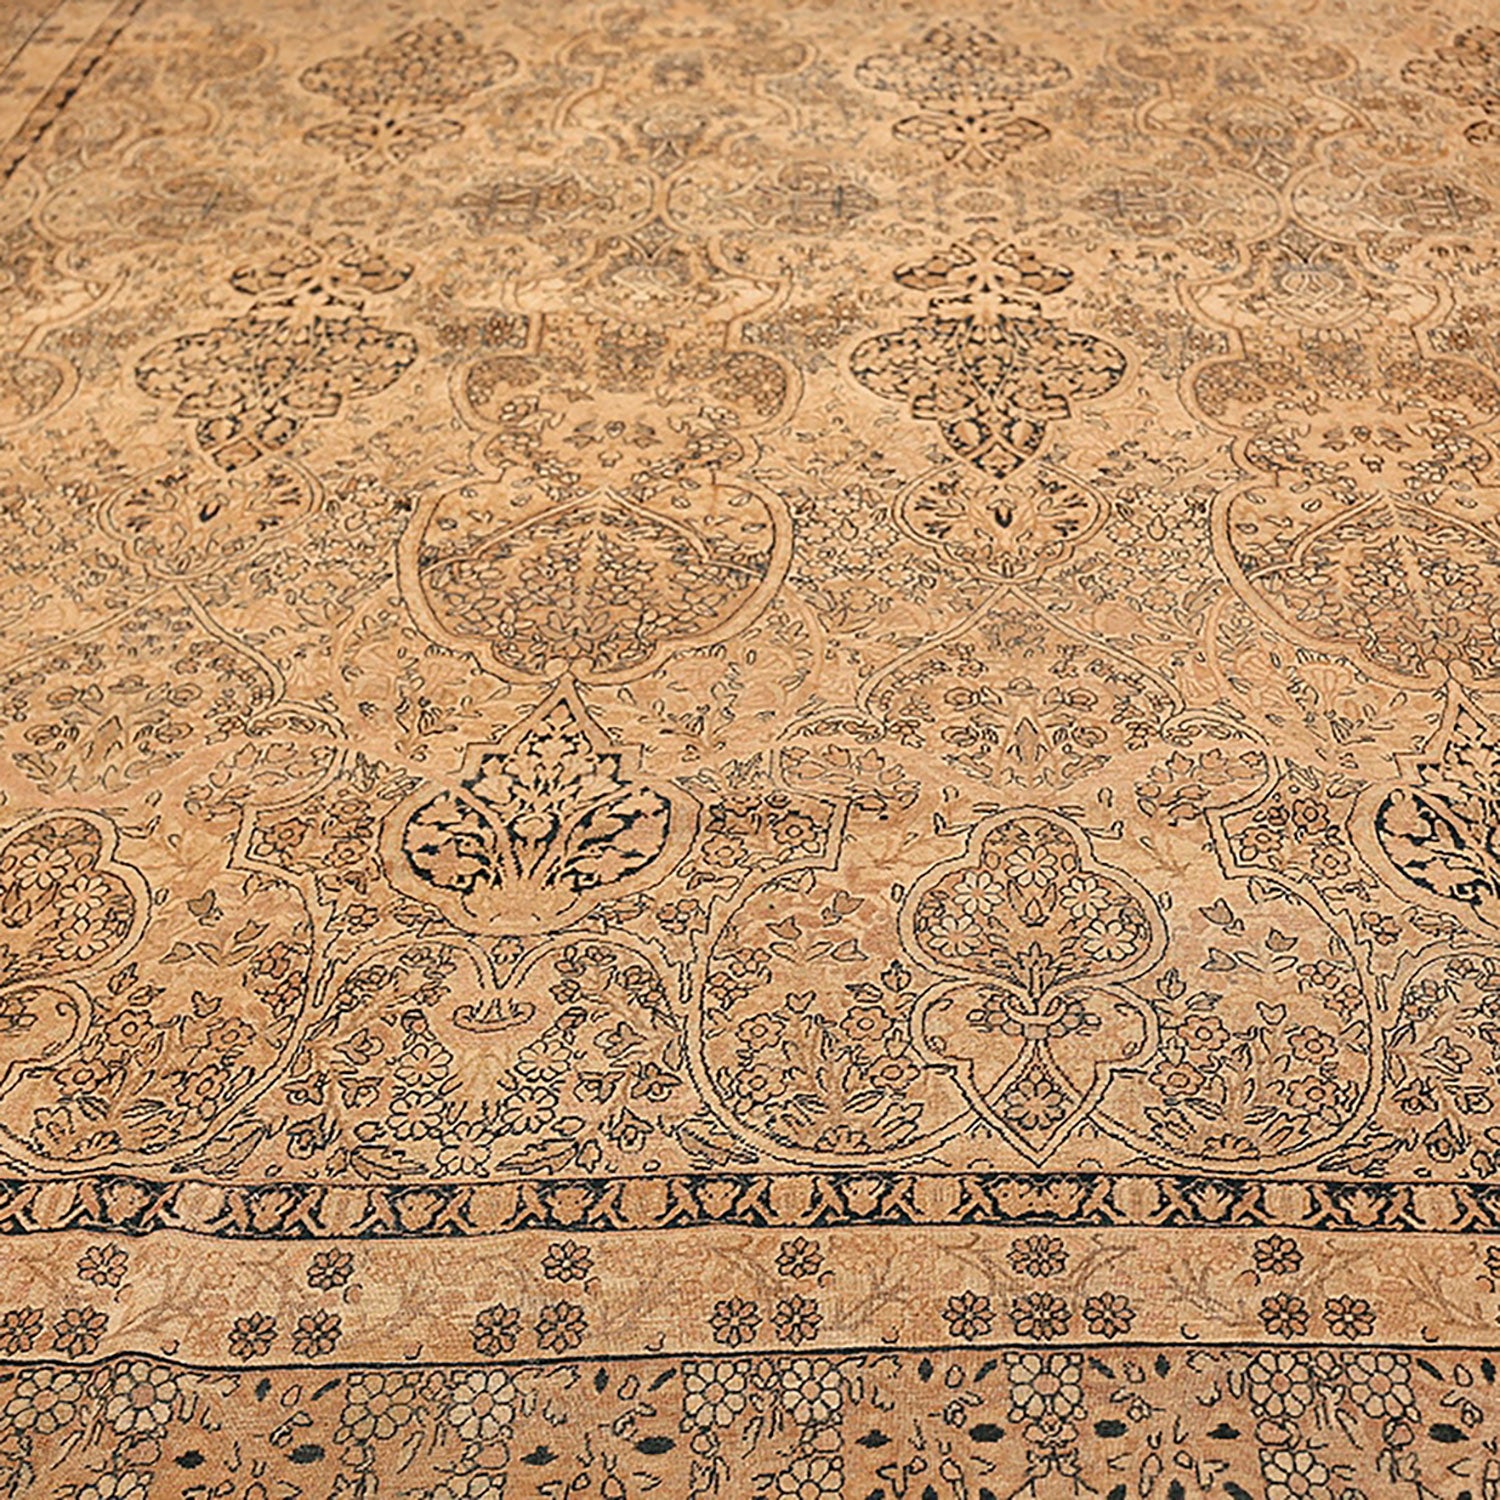 Exquisite and intricate carpet showcases skillful craftsmanship and rich design.